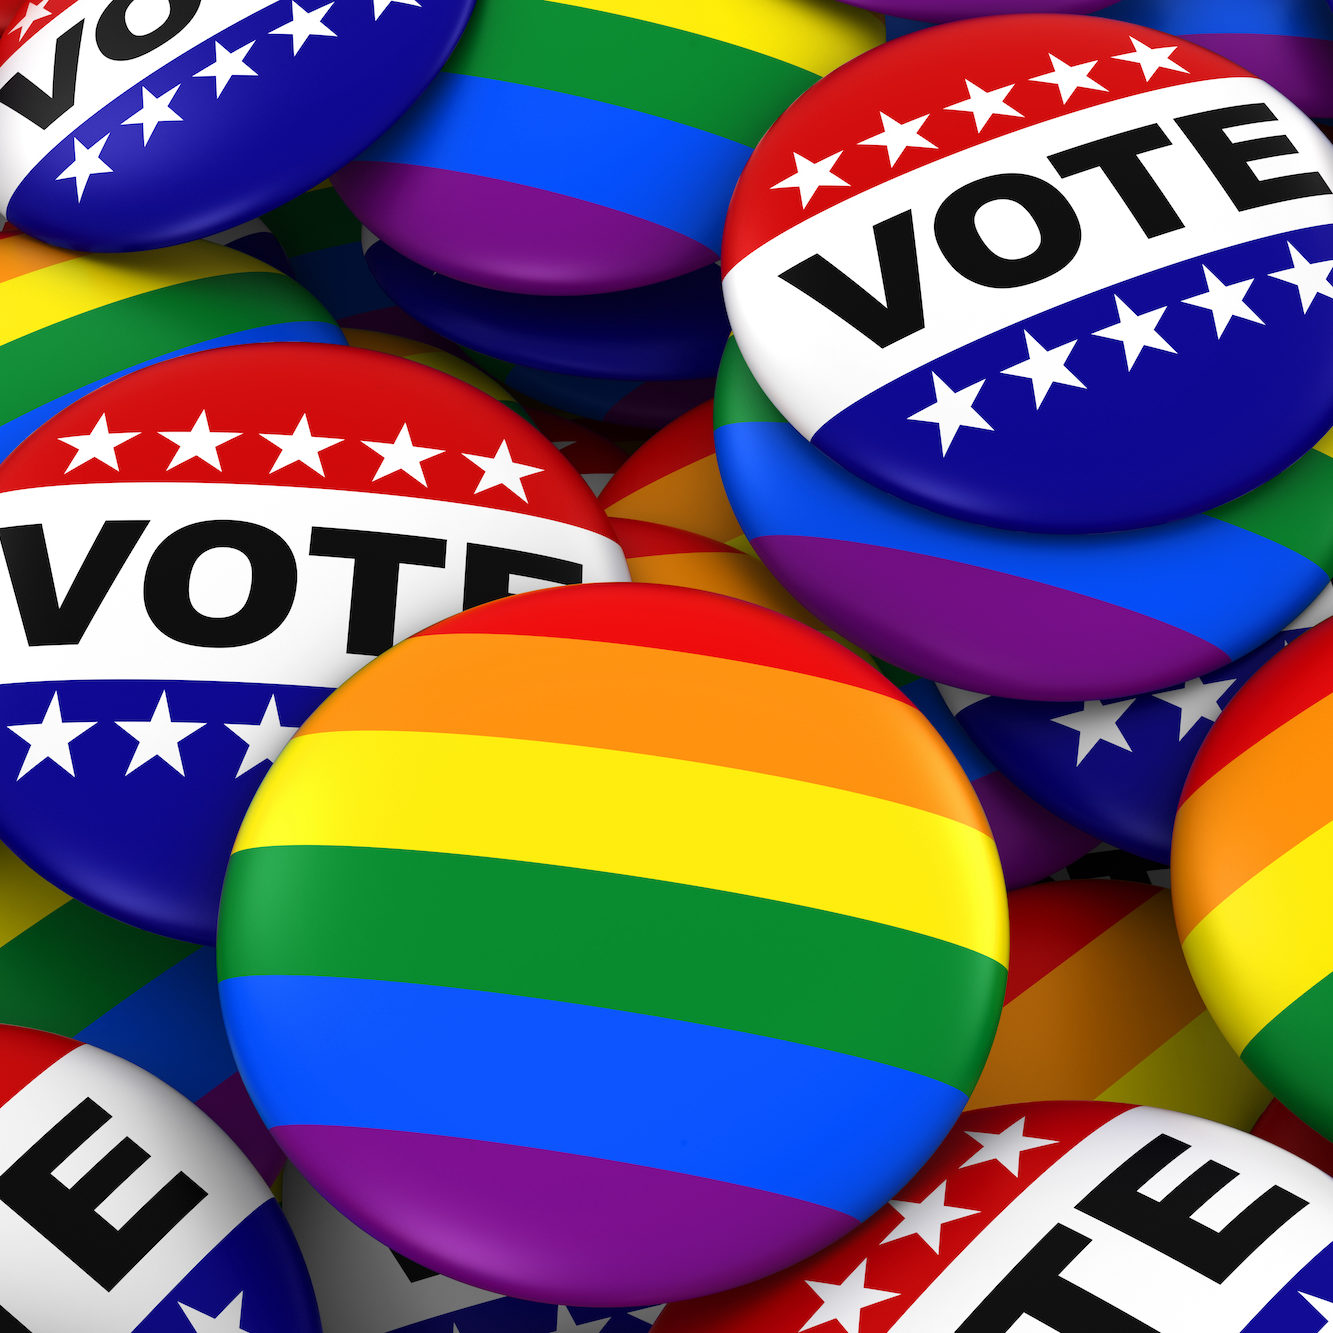 Vote for Gay Rights Concept - Gay Pride and Vote Badges 3D Illustration